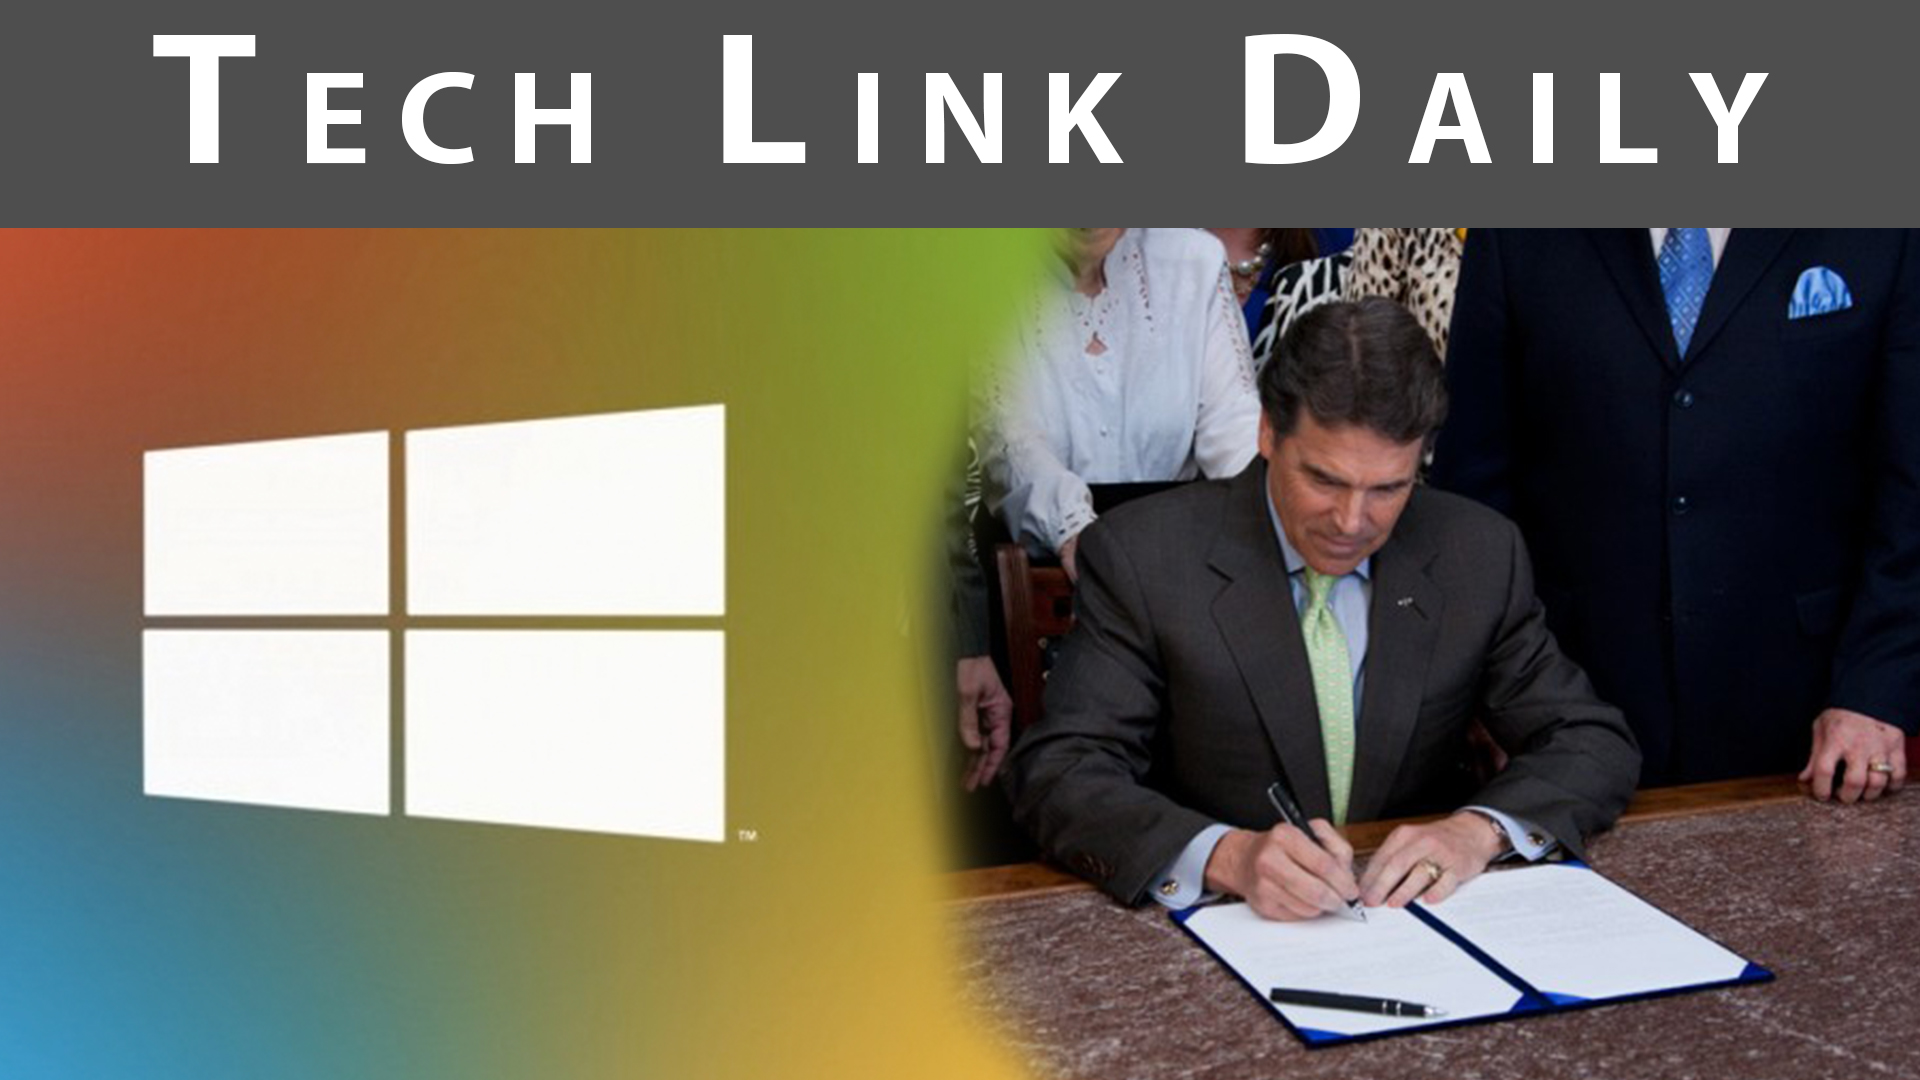 Texas Email Privacy, Leaked Windows 8.1 Screenshot, & More